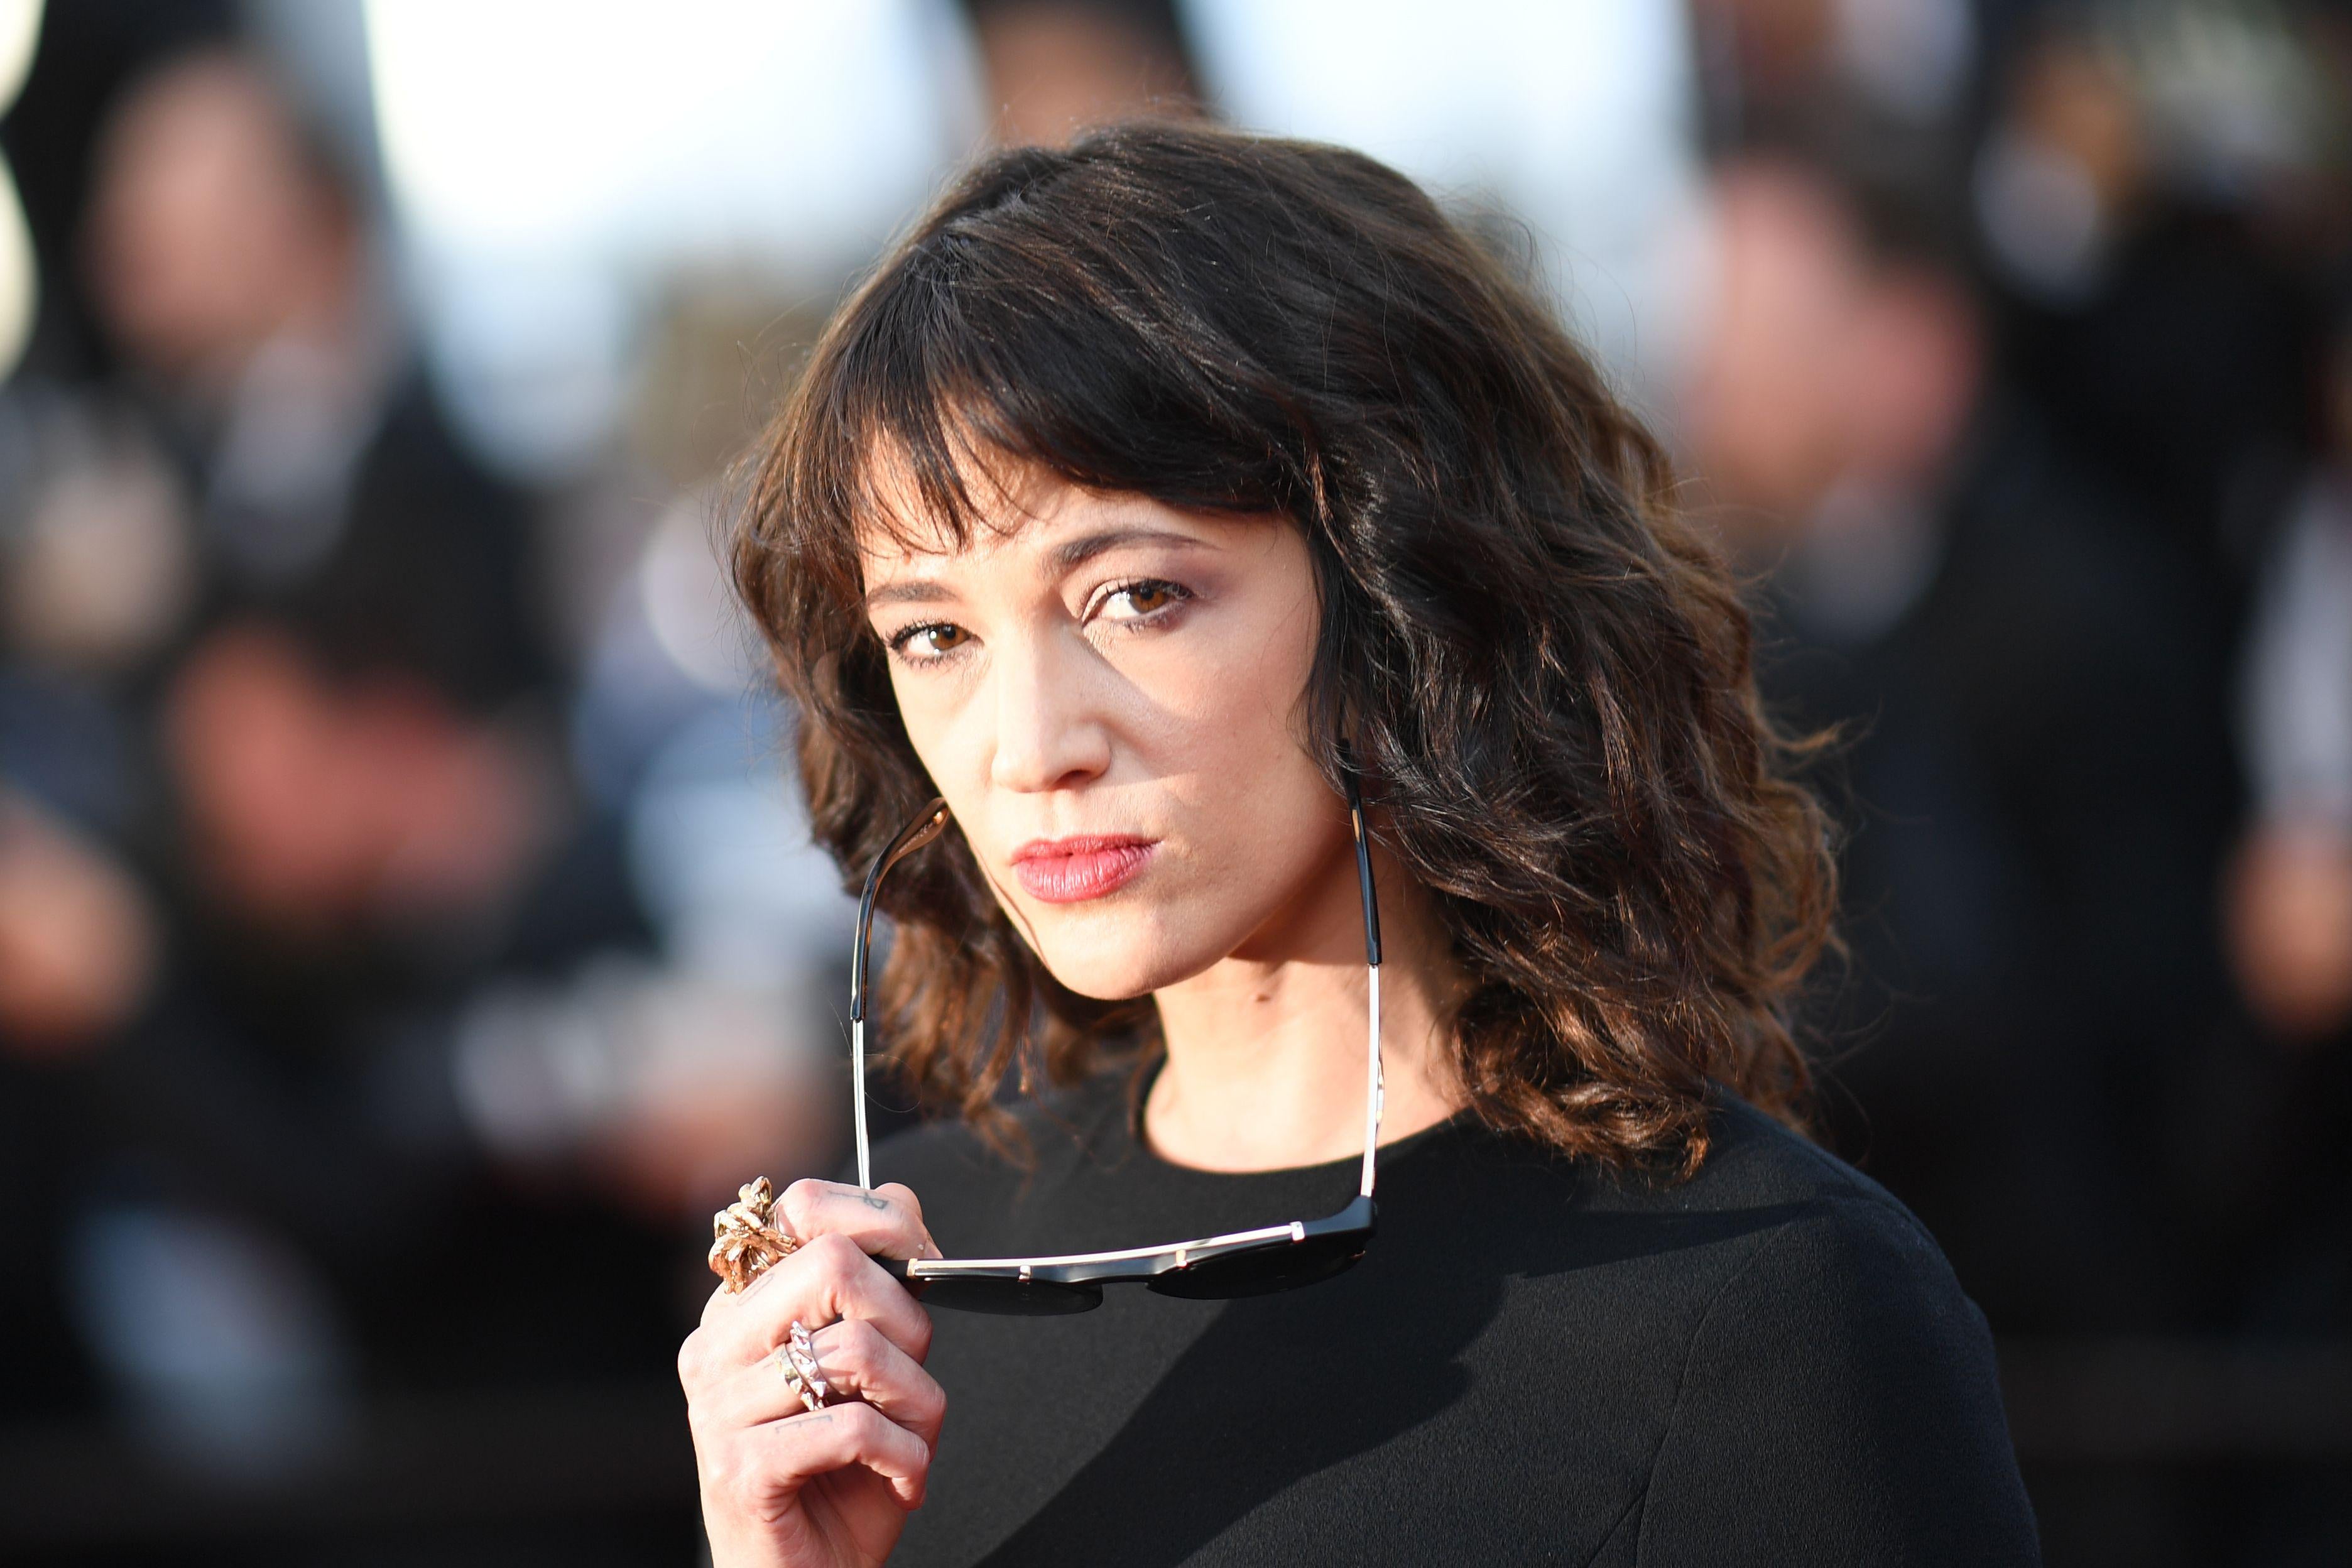 Asia Argento posing with sunglasses lowered